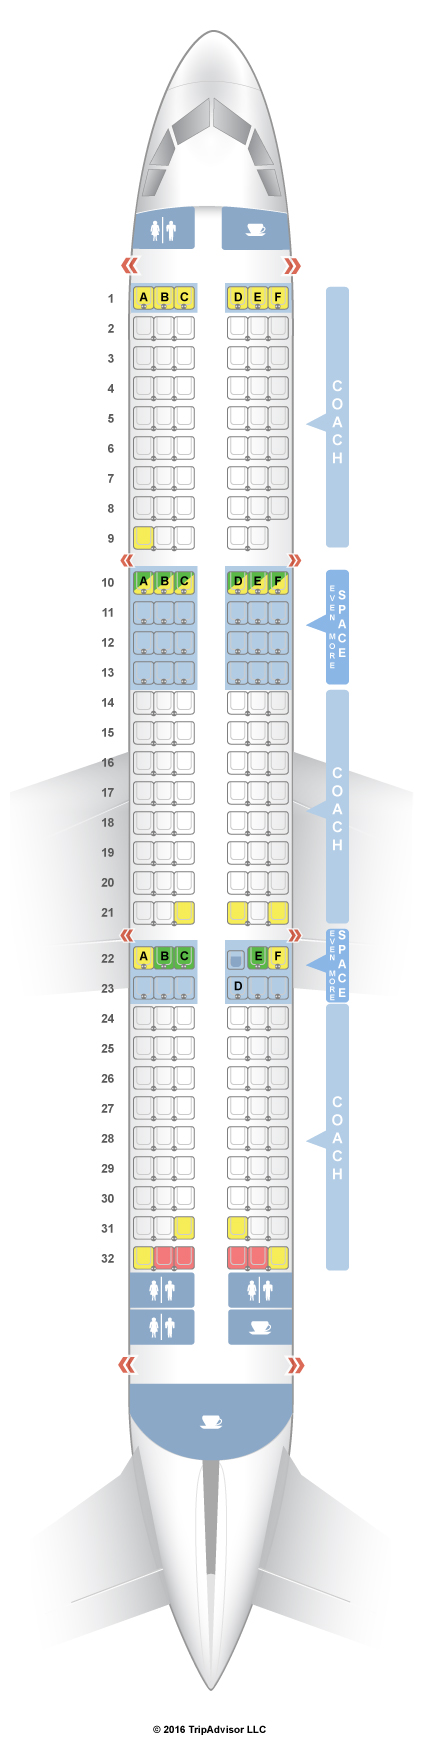 jetblue airline seat map